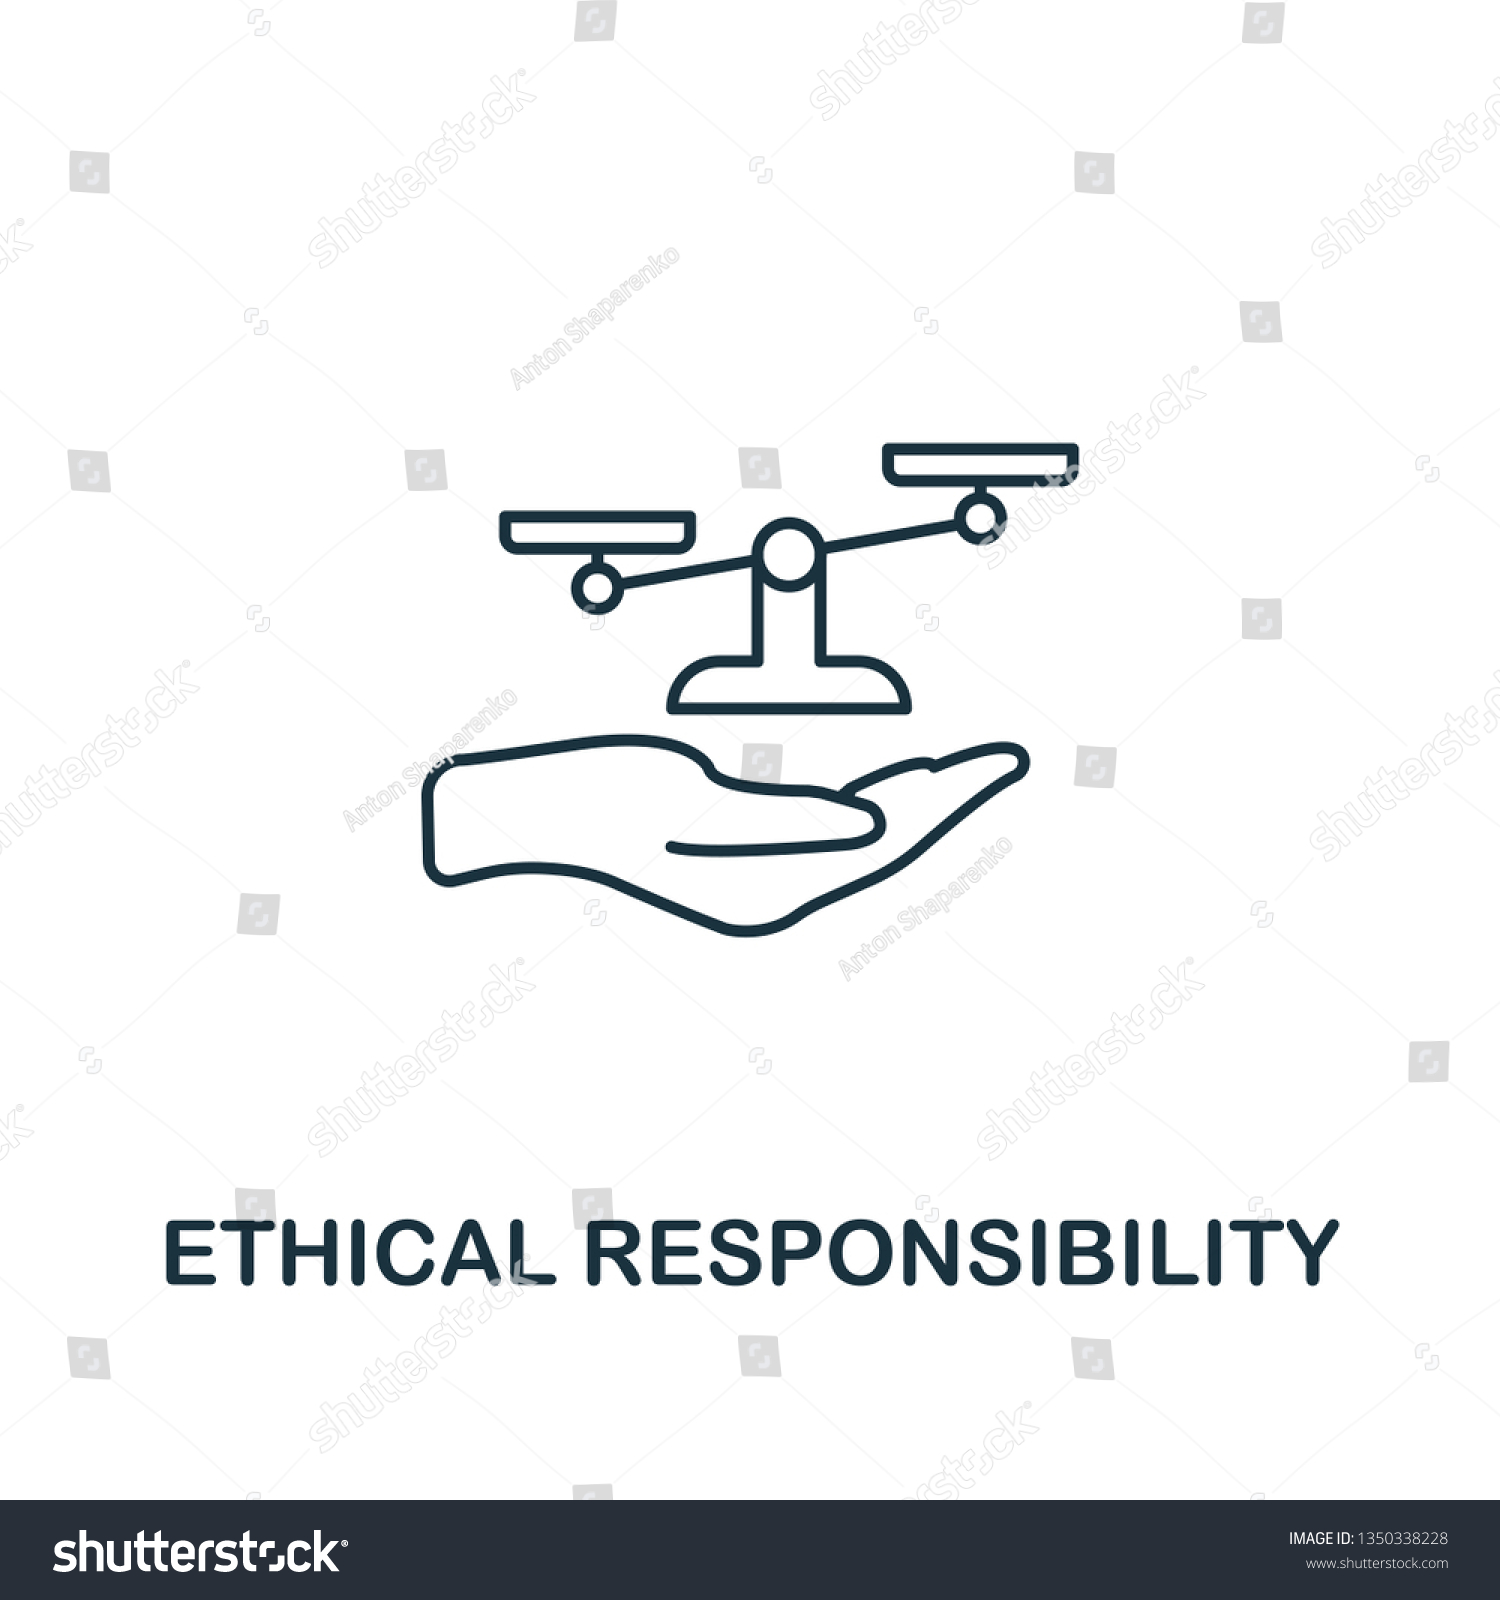 Ethical Responsibility Icon Thin Line Design Stock Vector Royalty Free Shutterstock